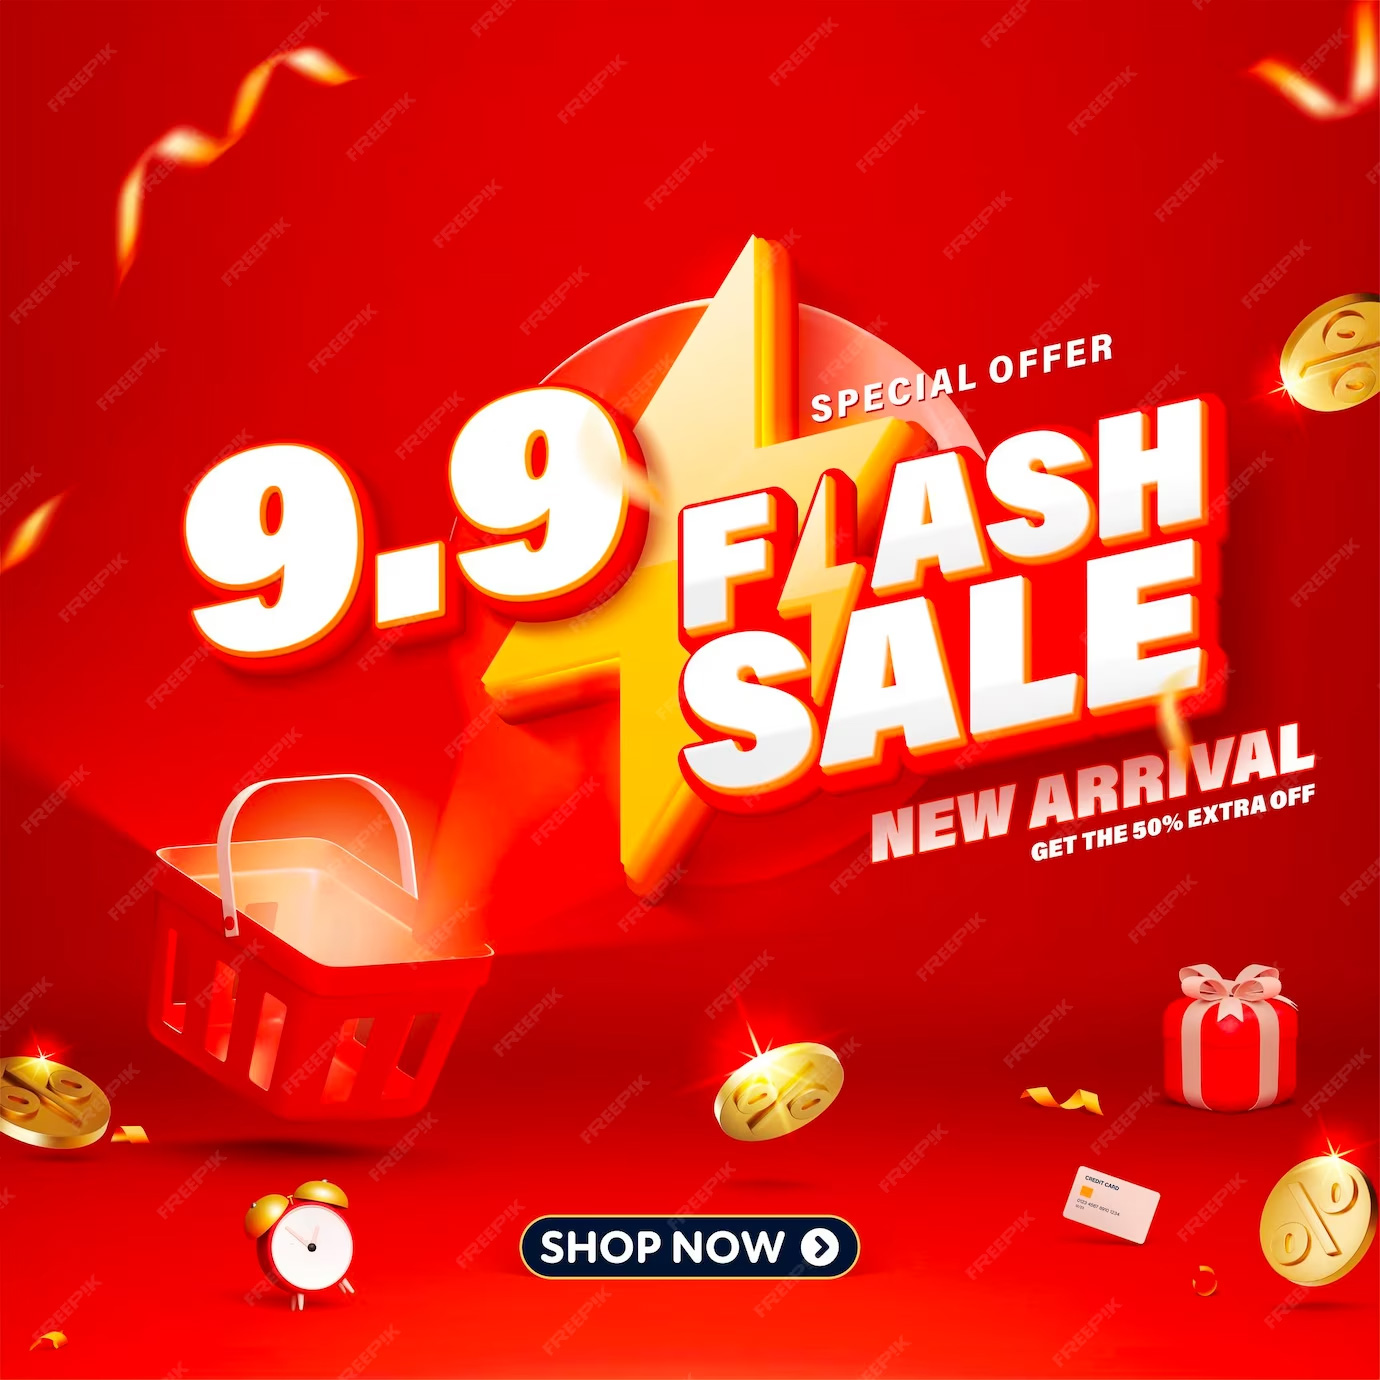 99 3d style flash sale banner template design for web or social media